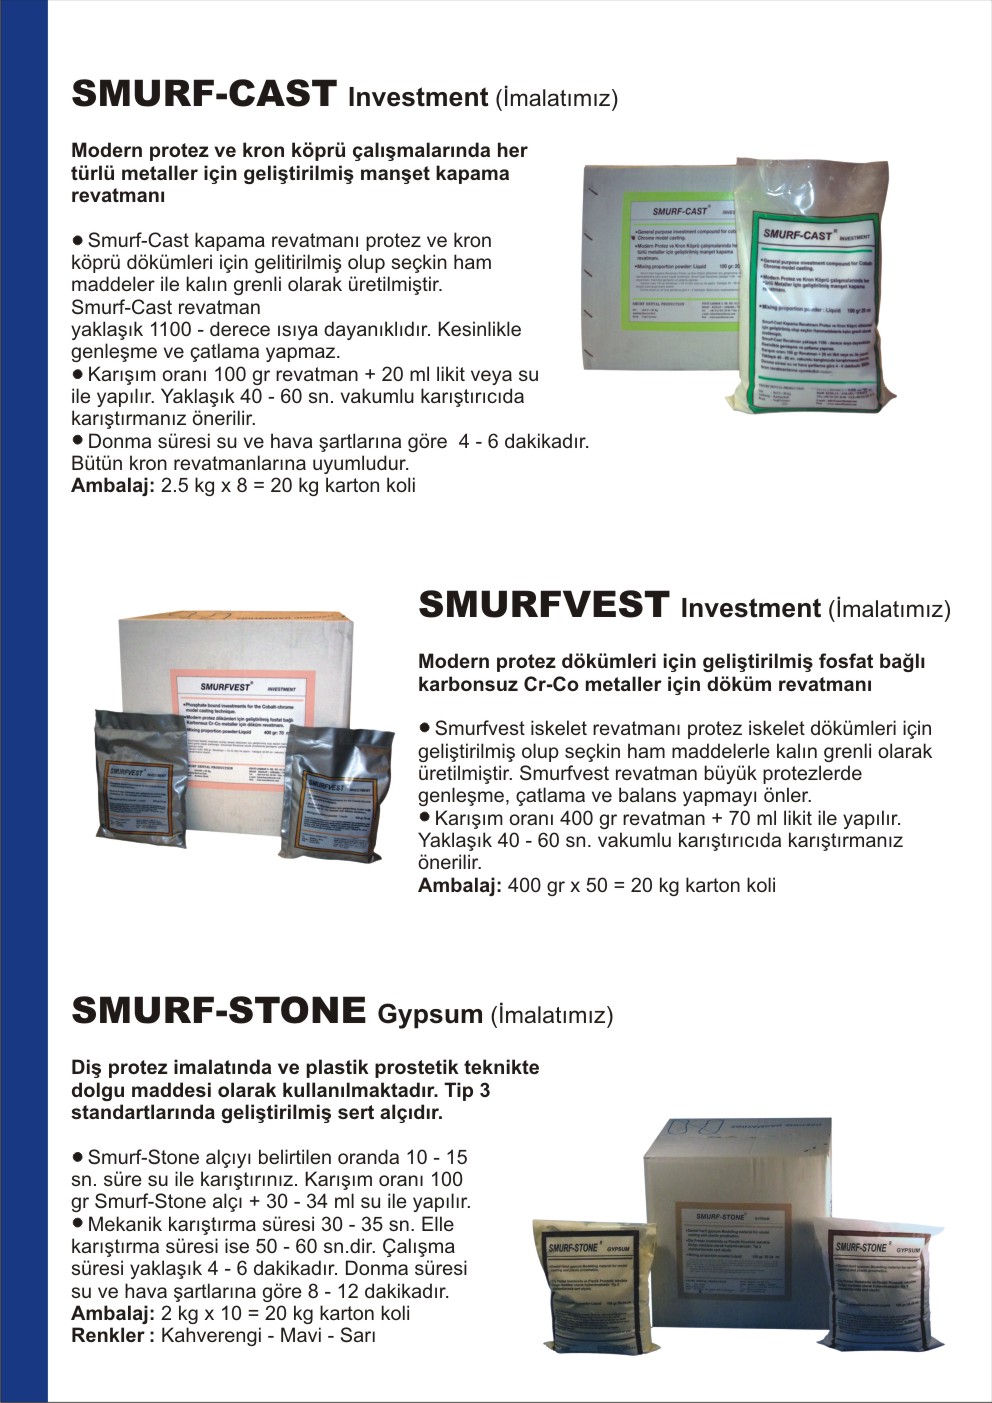 SMURF-CAST INVESTMENT FOR CASTING AND USEING ALL DENTAL LABROTRY